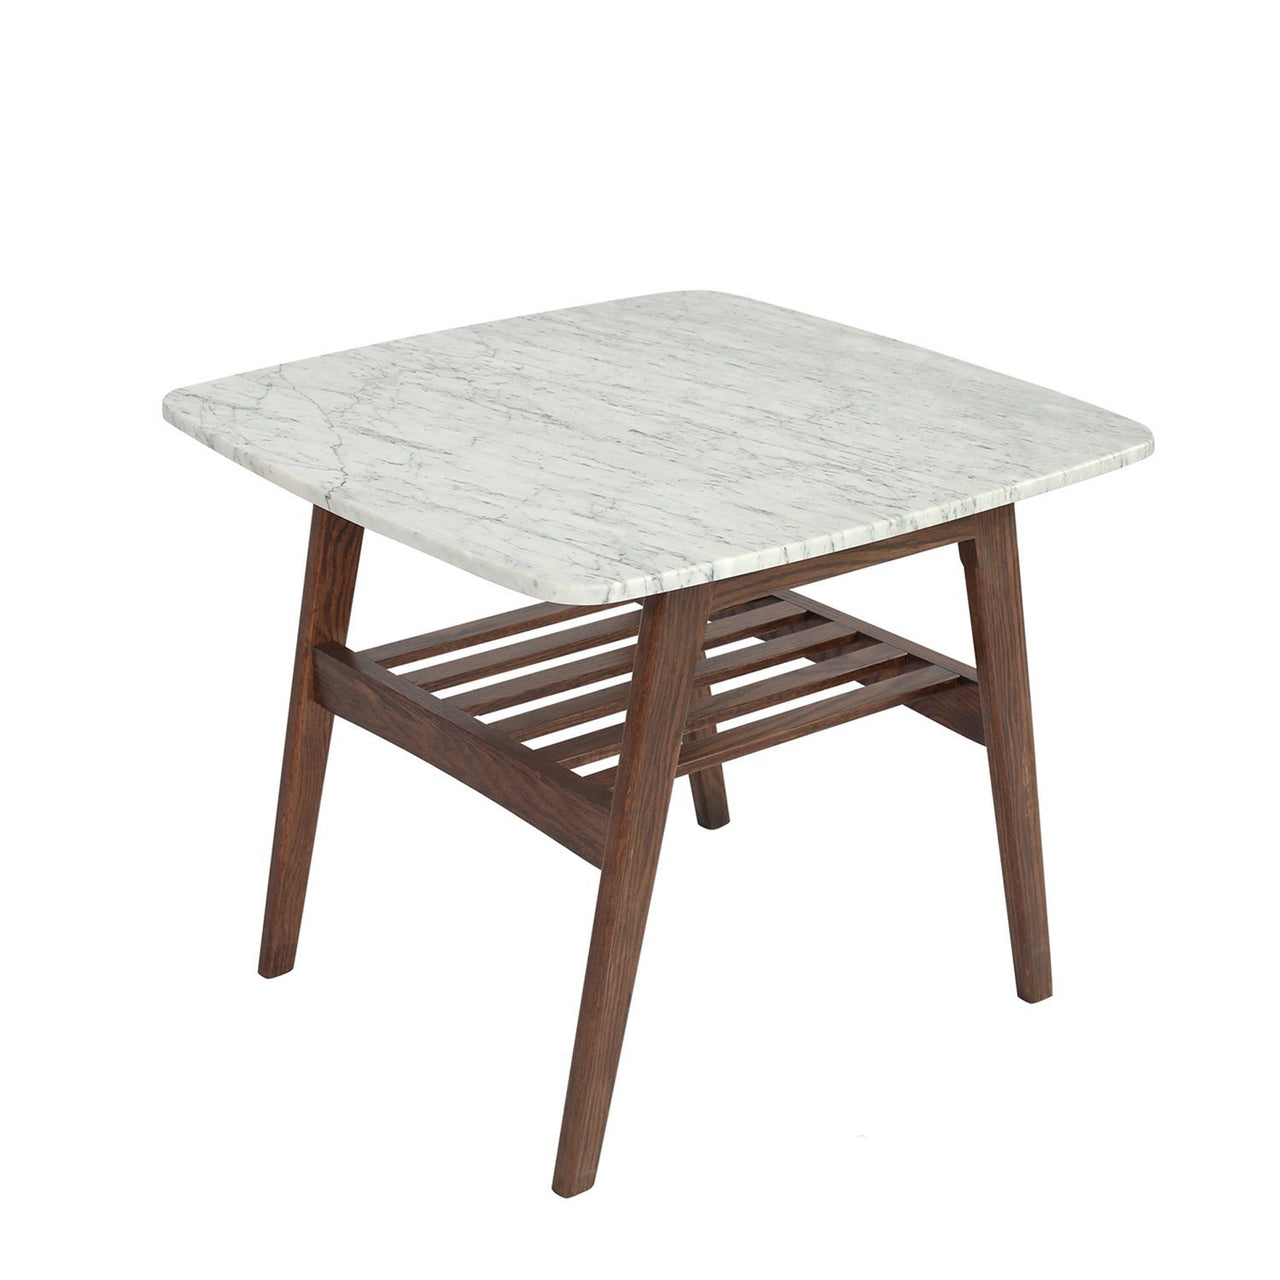 Cassoro 24" Square Italian Carrara White Marble Side Table with Shelf Side Table The Bianco Collection Walnut 